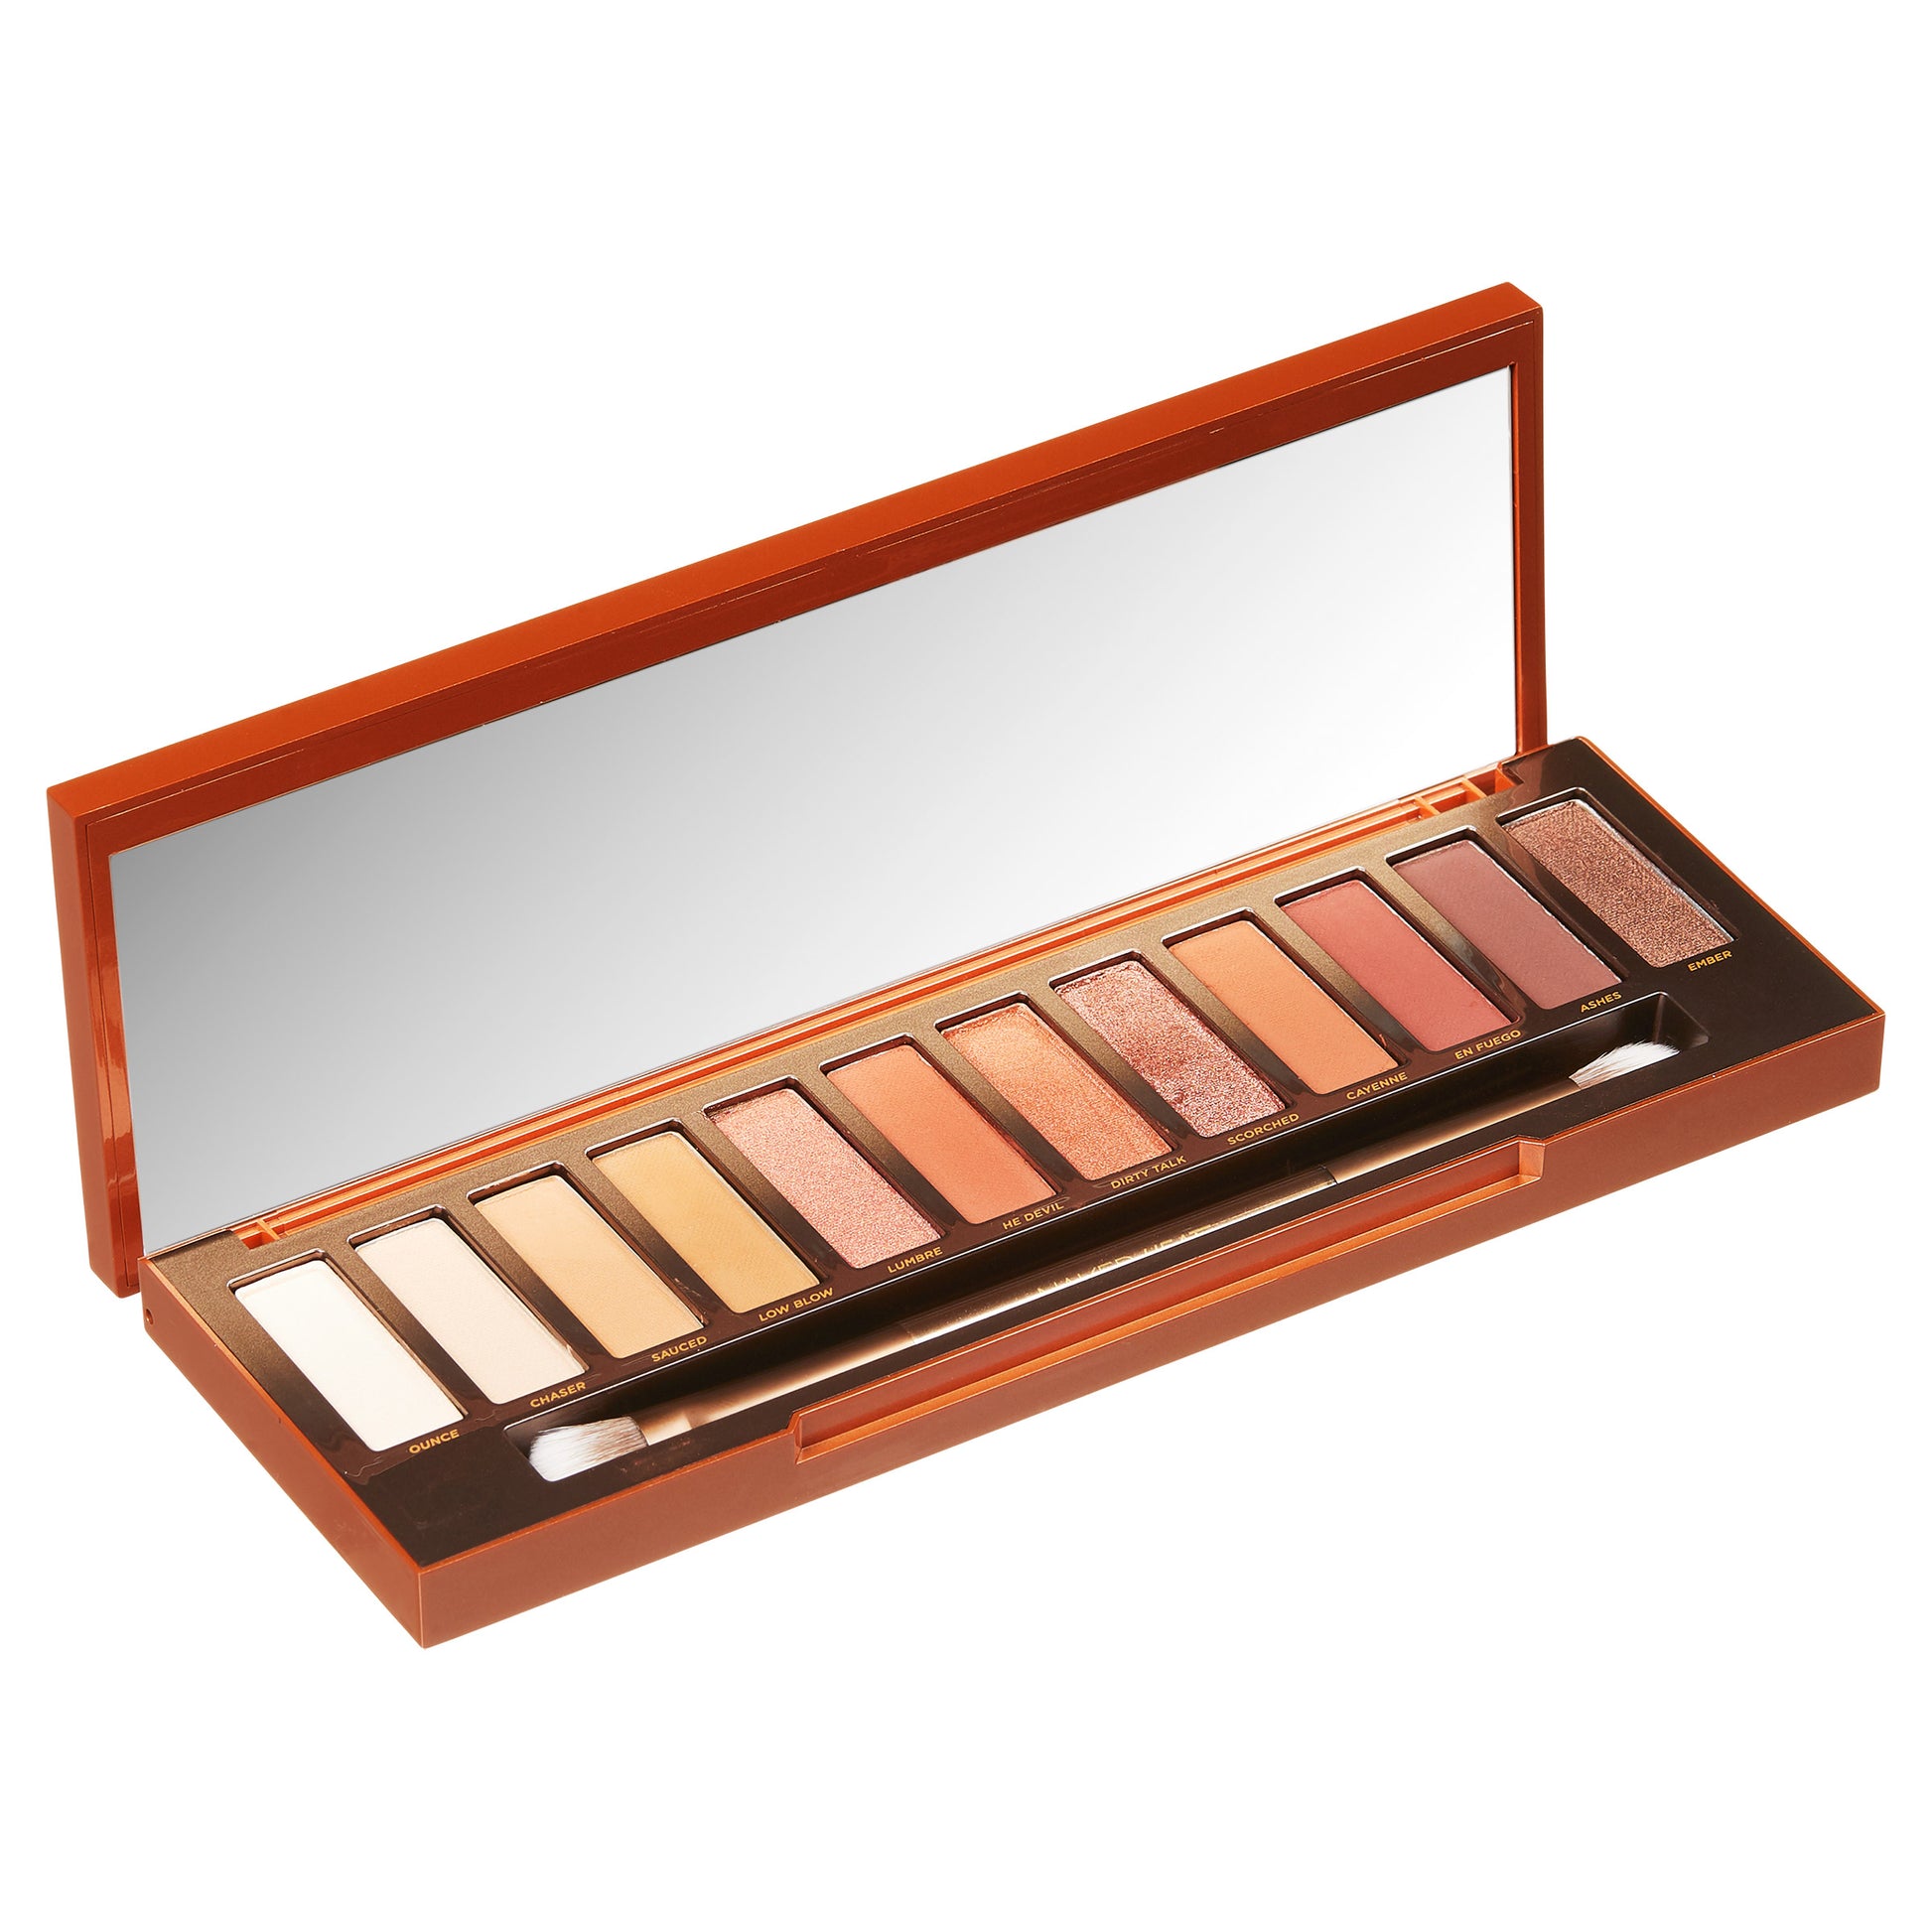 Urban Decay Naked Heat Eyeshadow Palette: A Stunning Collection of Warm Tones for a Striking Eye Look